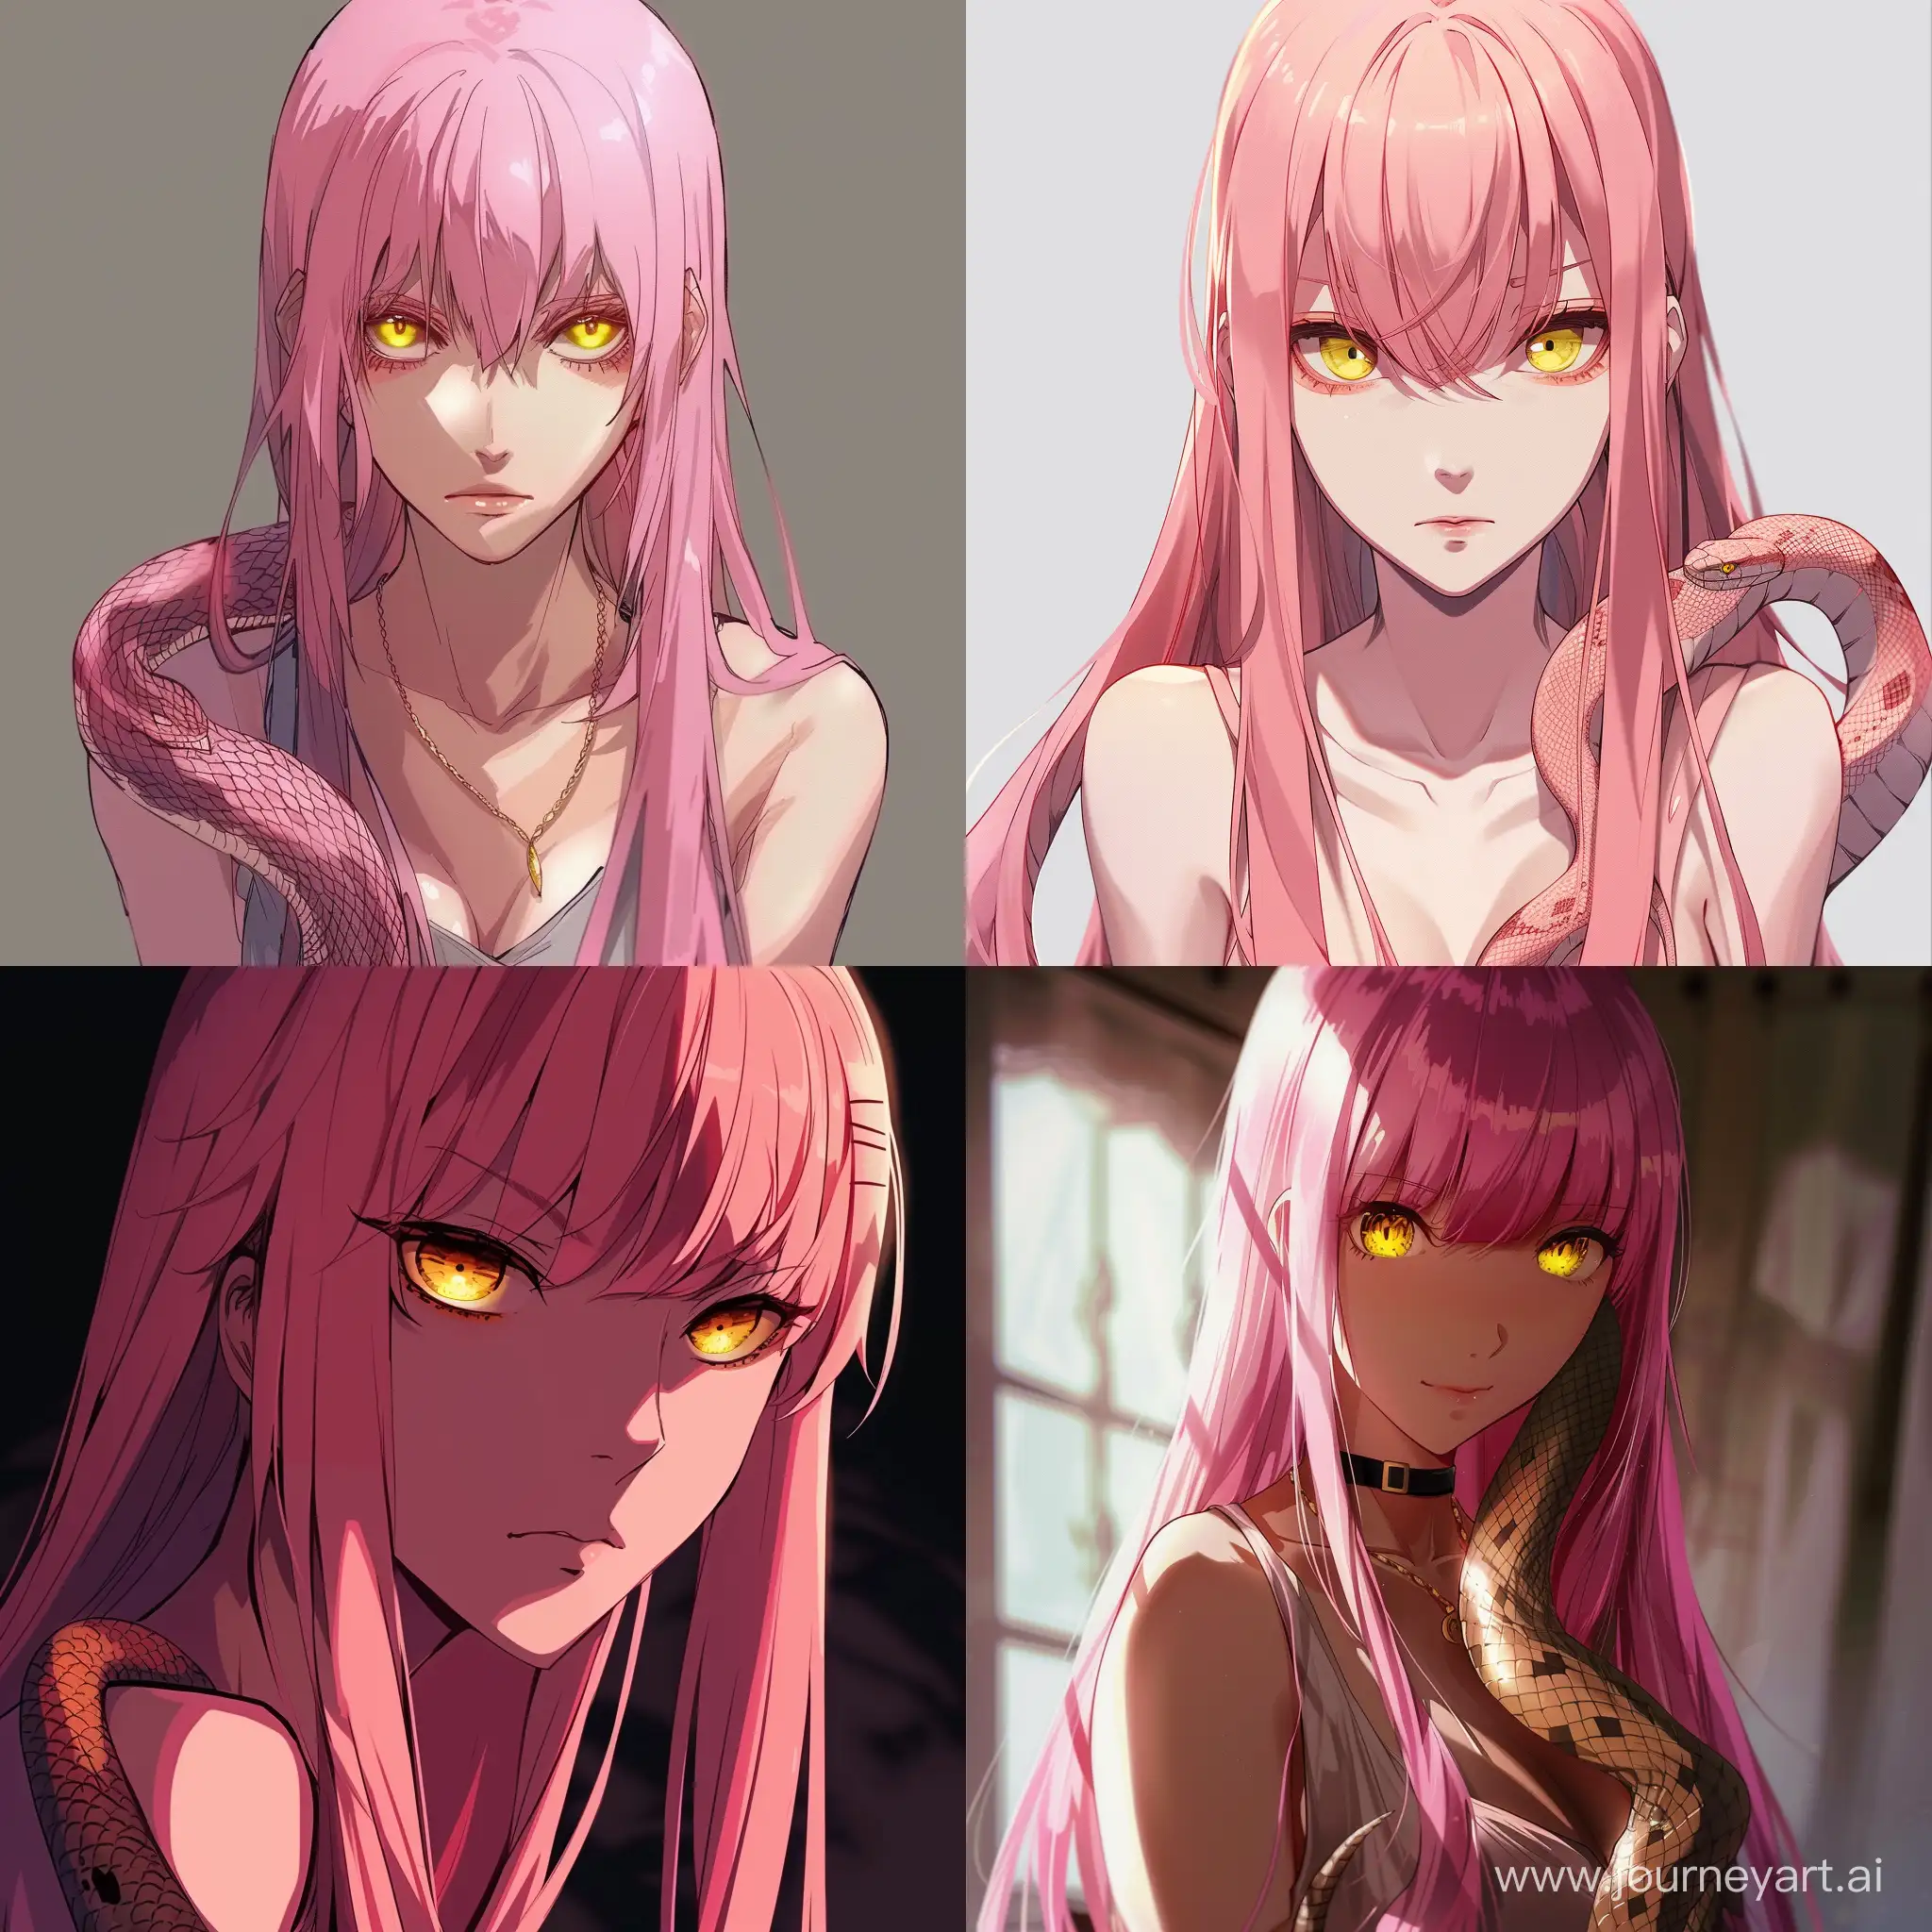 Anime-Snake-Girl-with-Pink-Hair-and-Yellow-Eyes